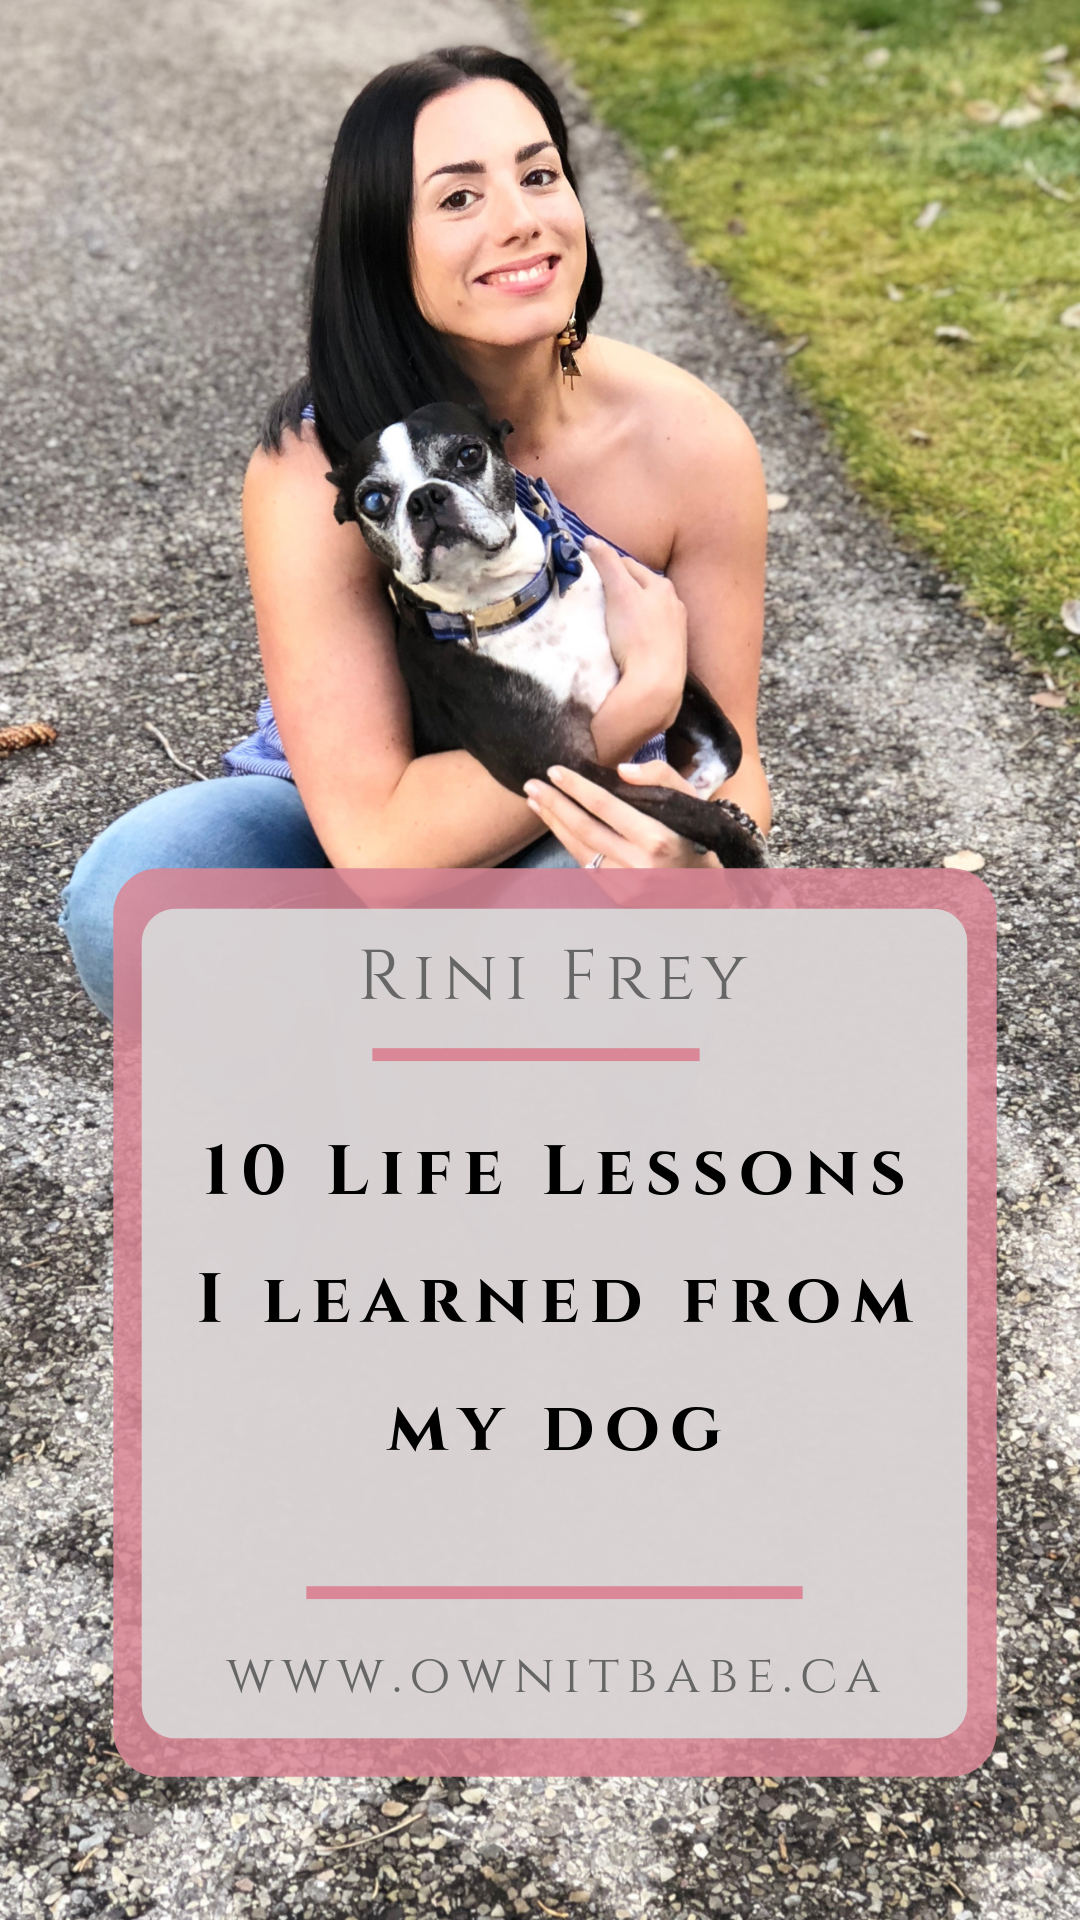 10 Valuable Life Lessons from my dog - How my Boston Terrier taught me to choose happiness over suffering every single day - by Rini Frey, ownitbabe.ca #happiness 